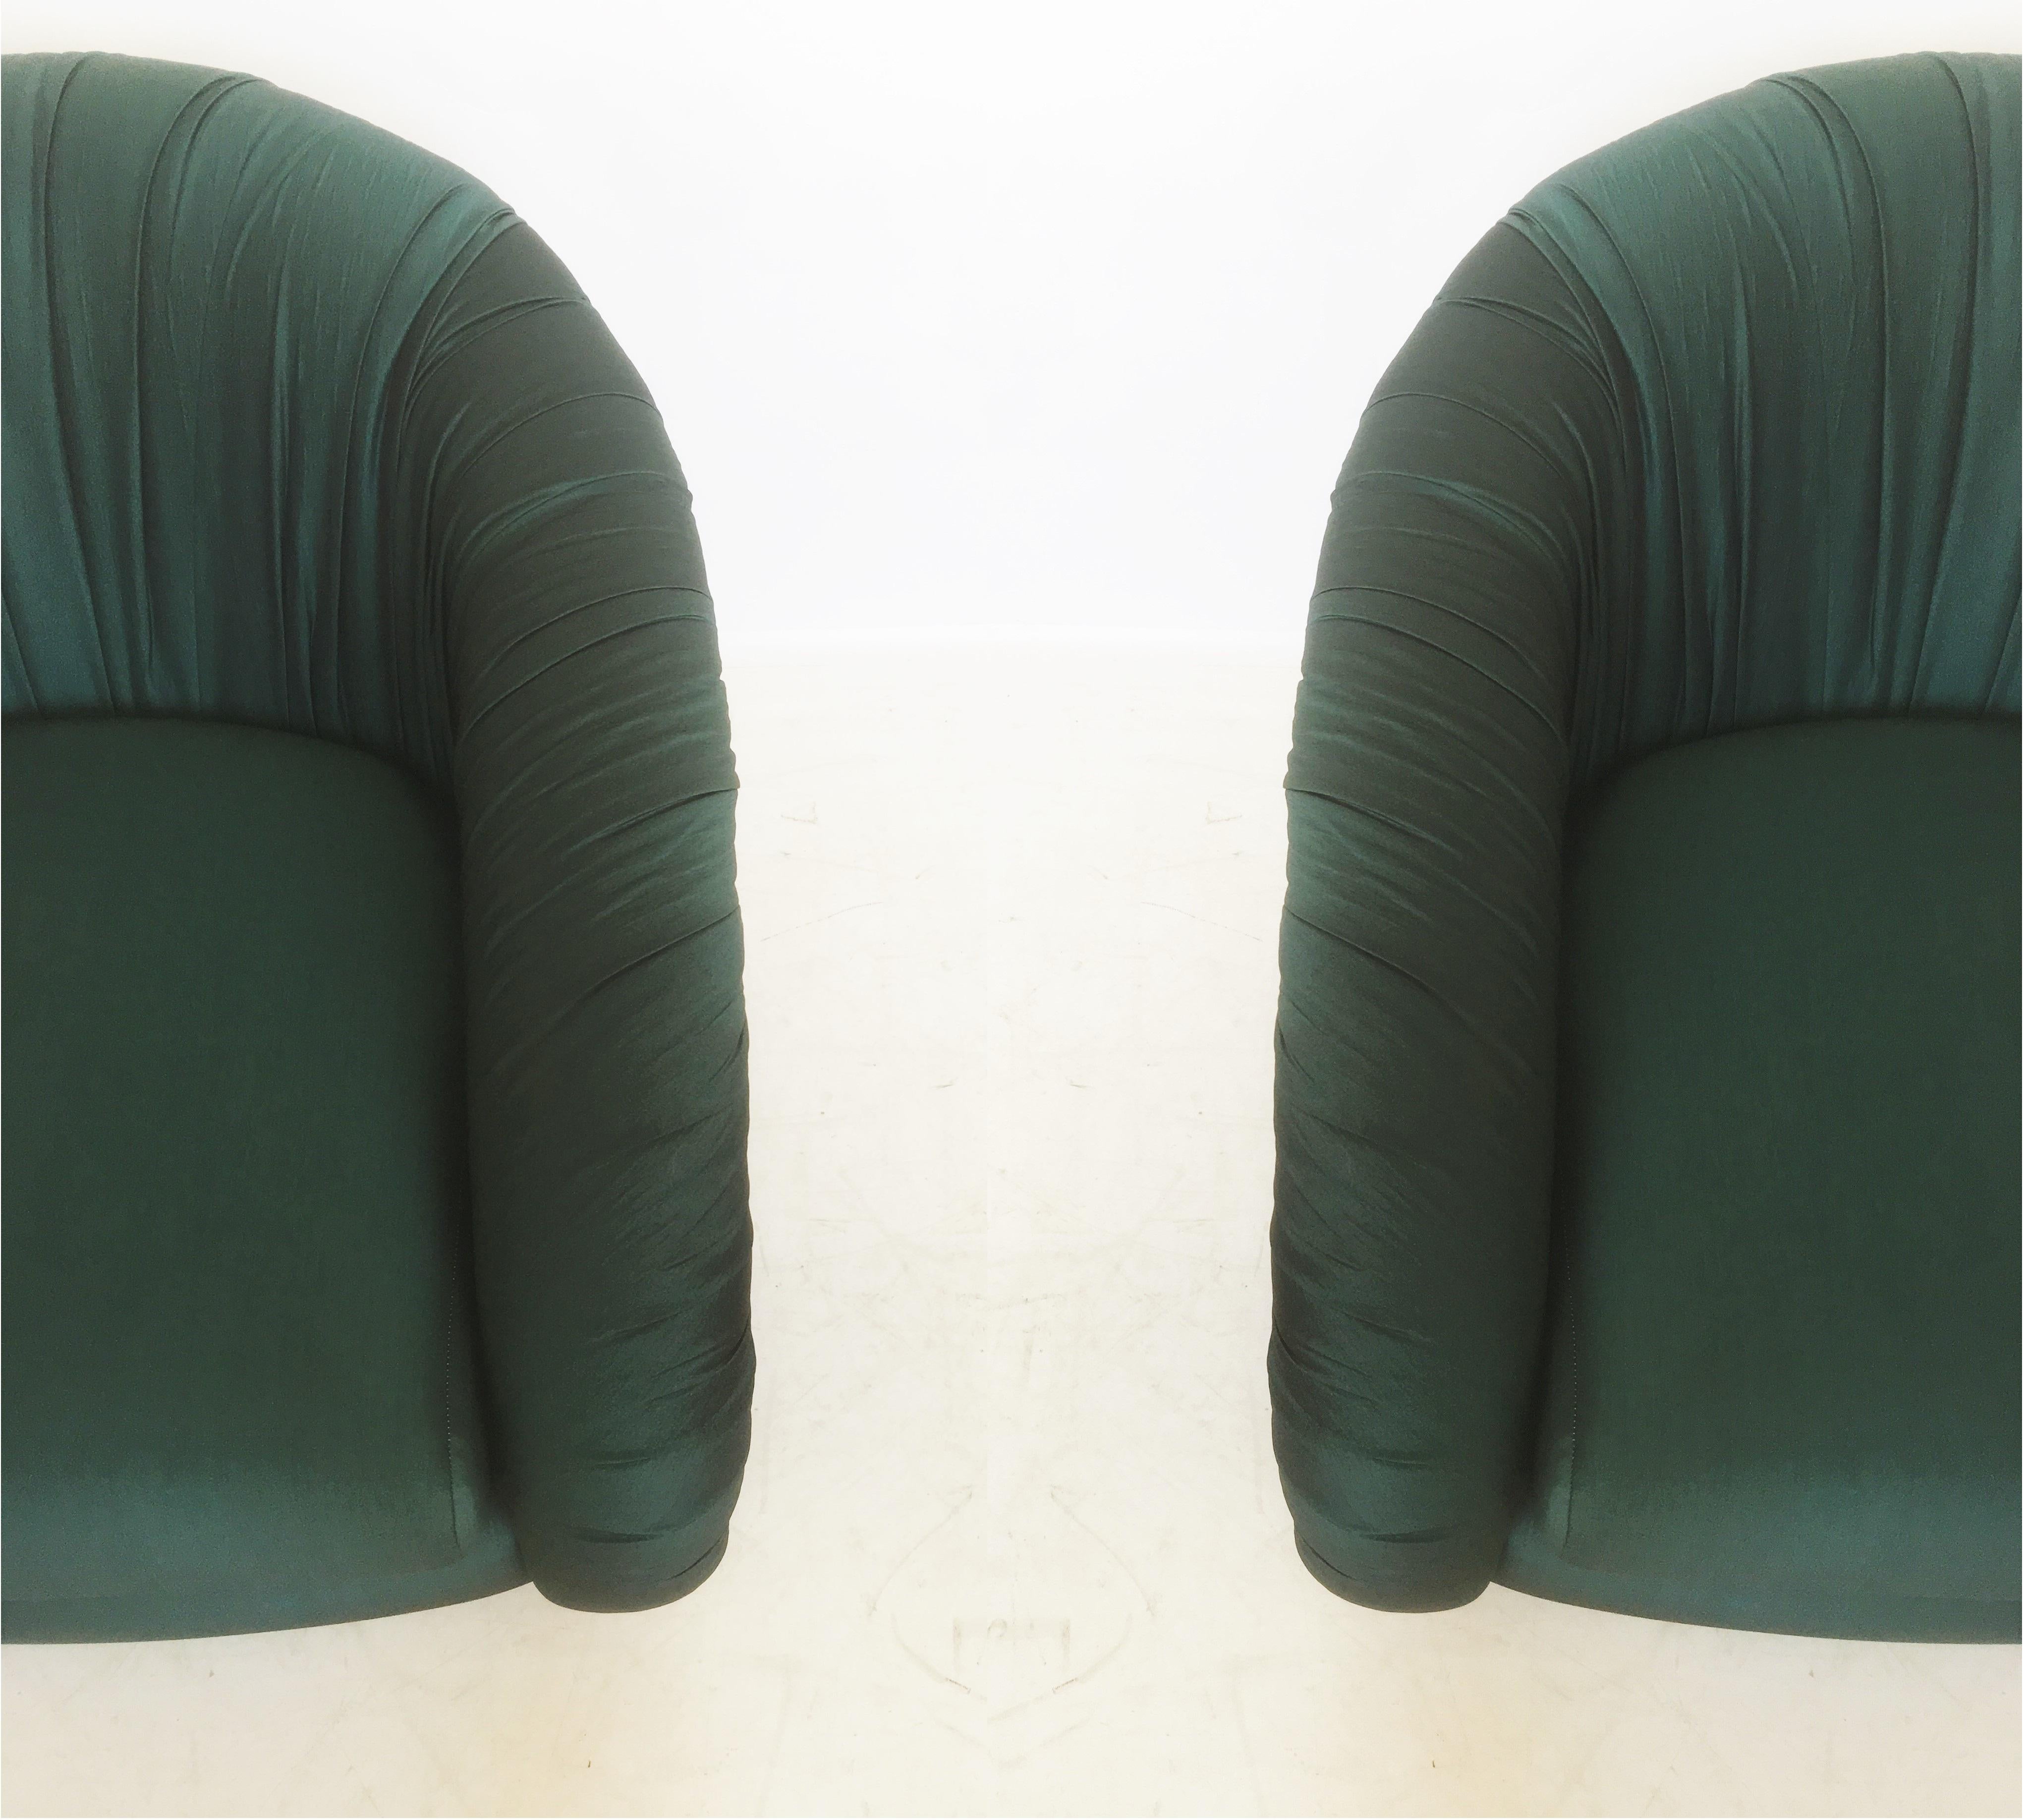 Pair of Mid-century Swivel Chairs in the style of Milo Baughman for Directional For Sale 1